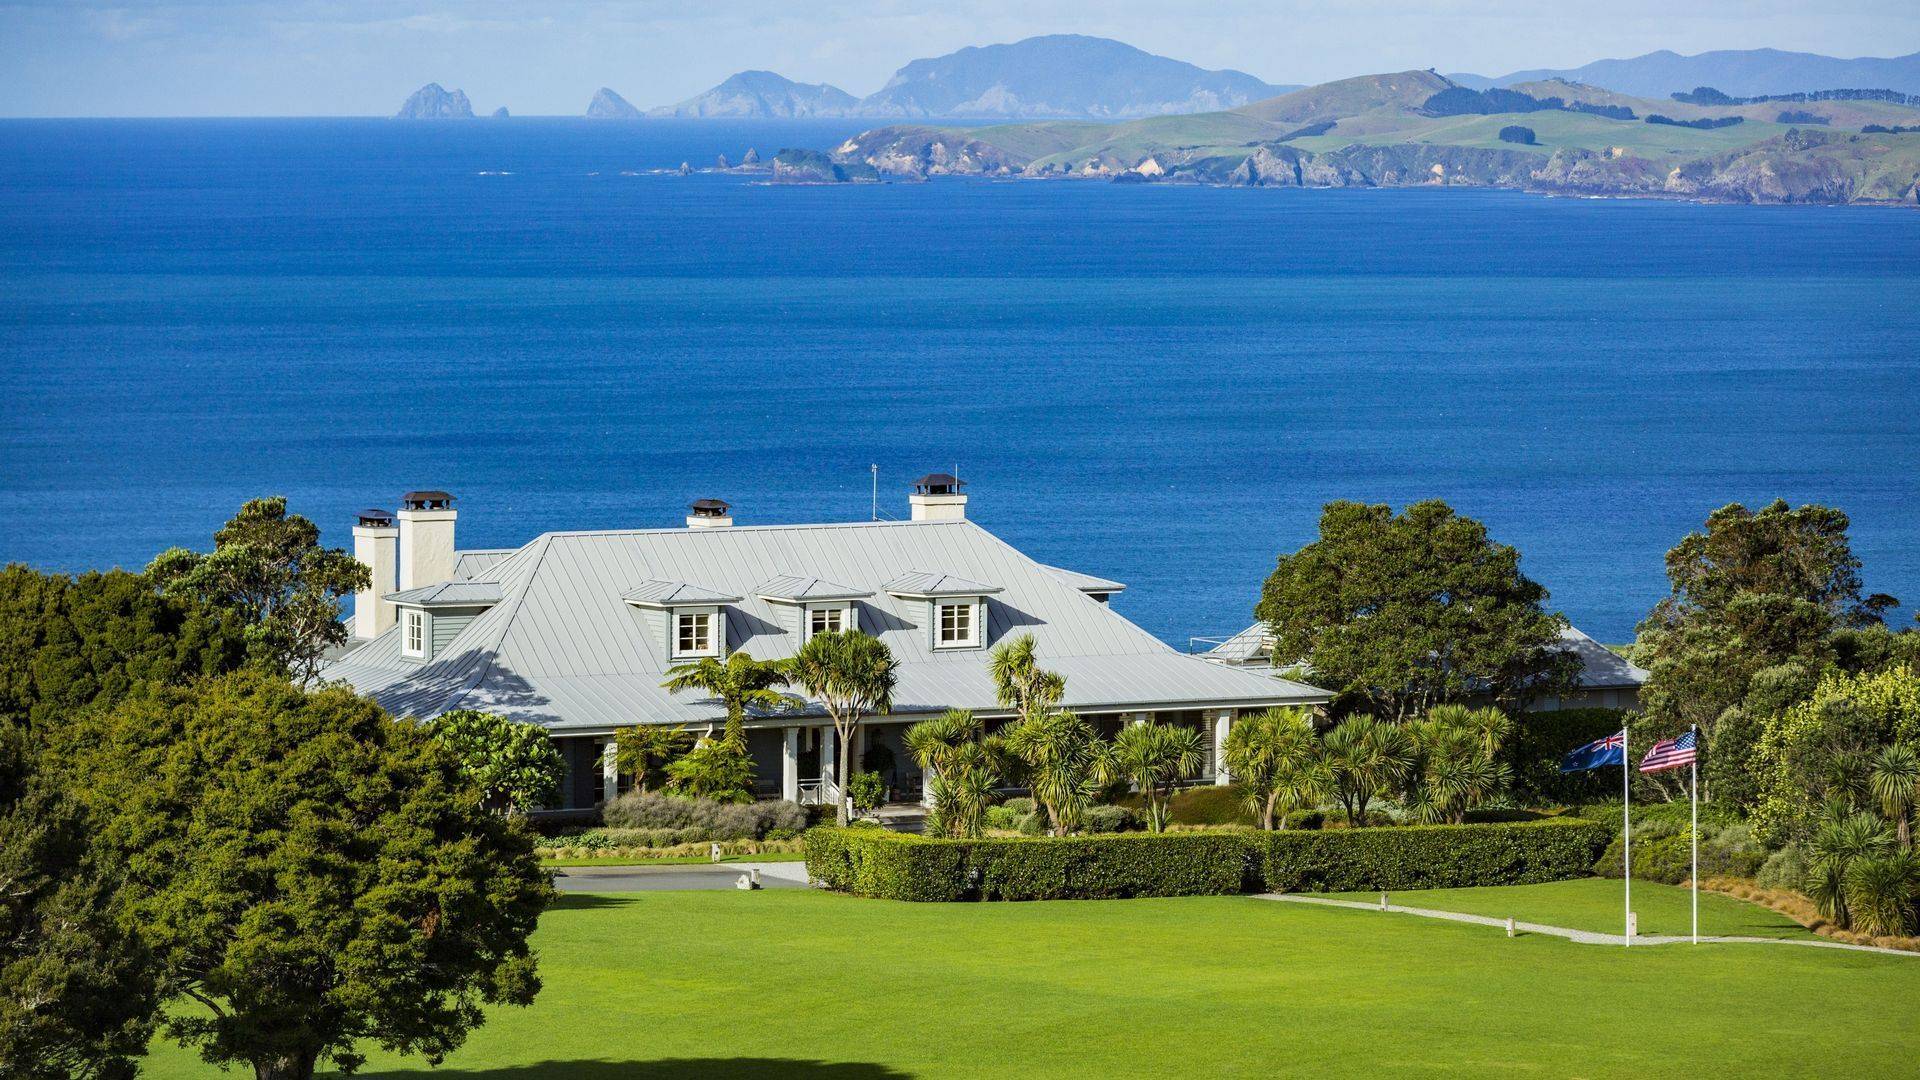 Discovering New Zealand Luxury with Robertson Lodges